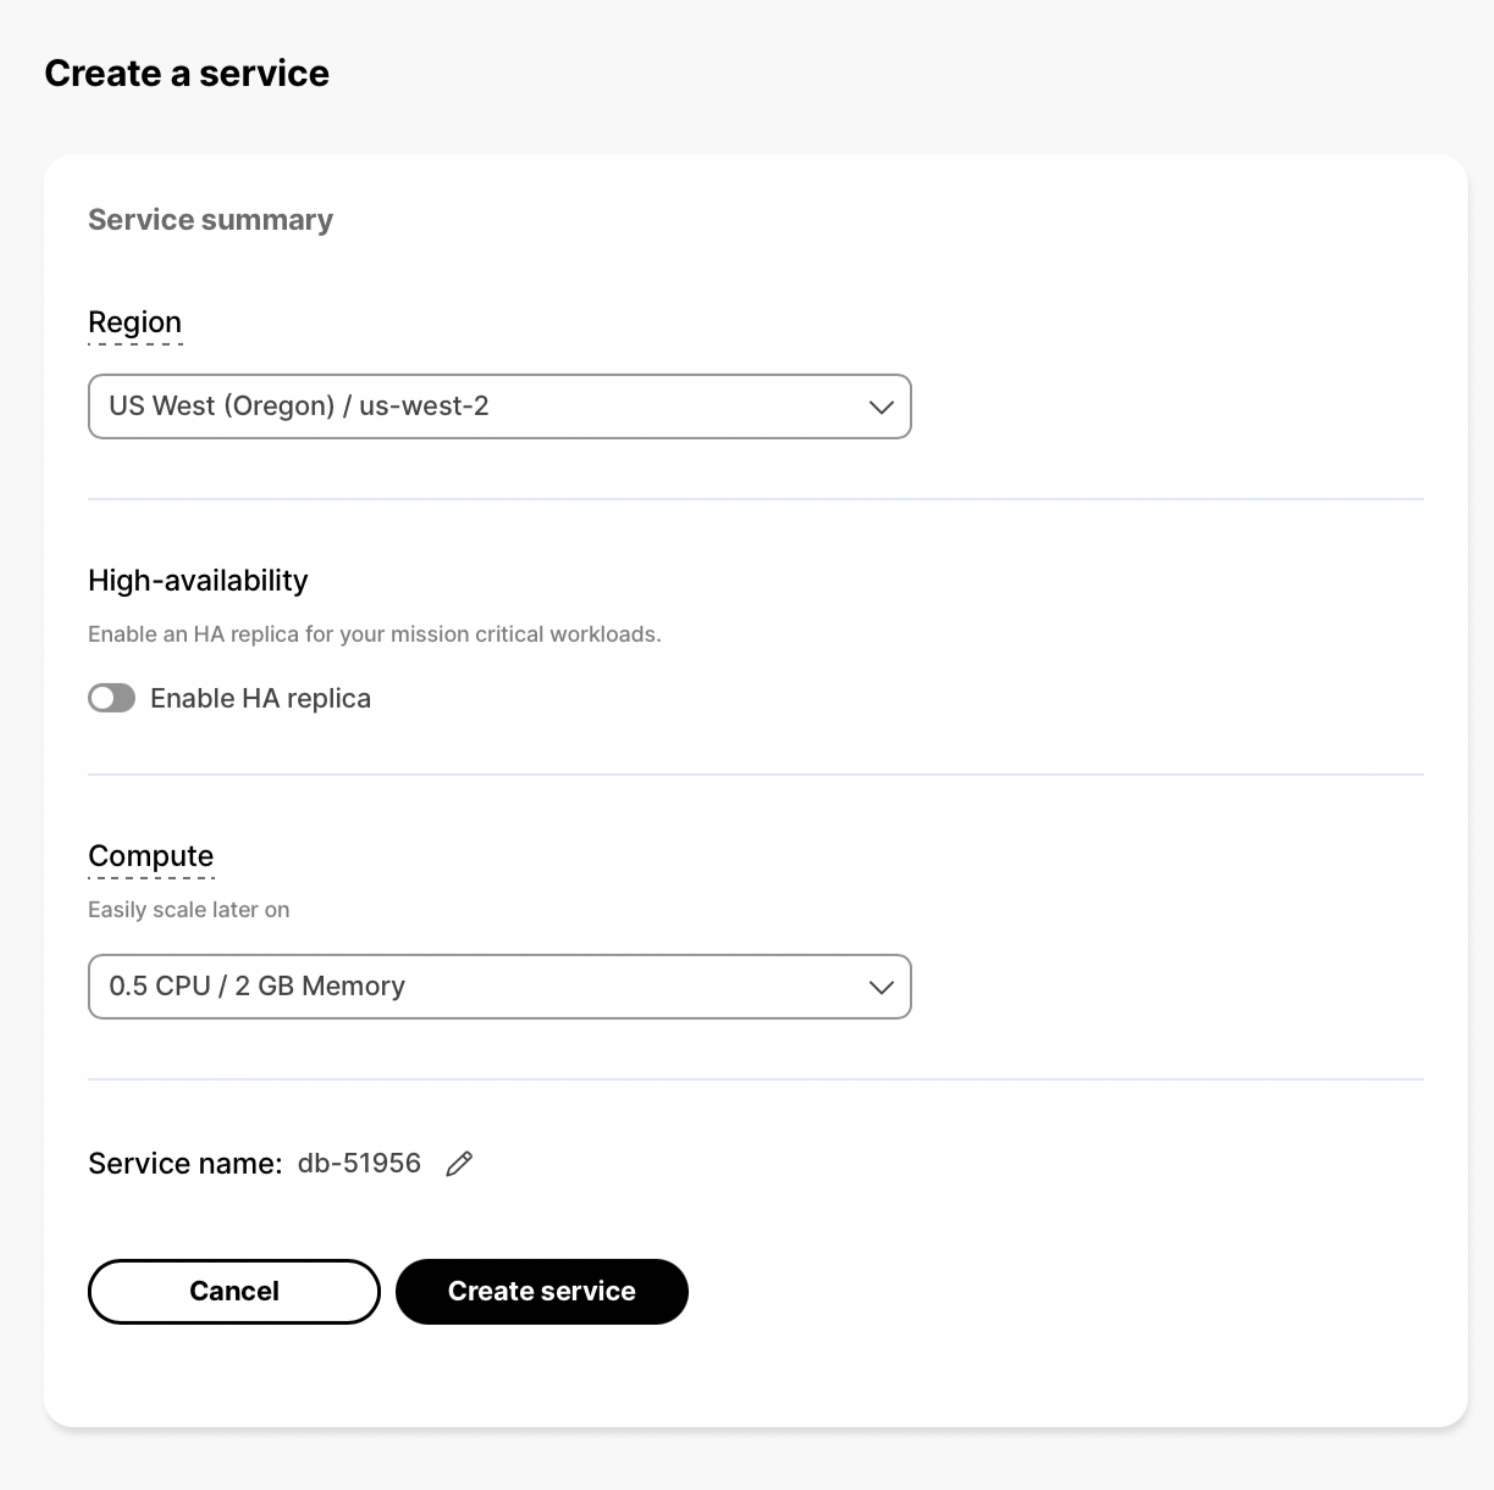  Create a service page in the Timescale UI: our new database storage model